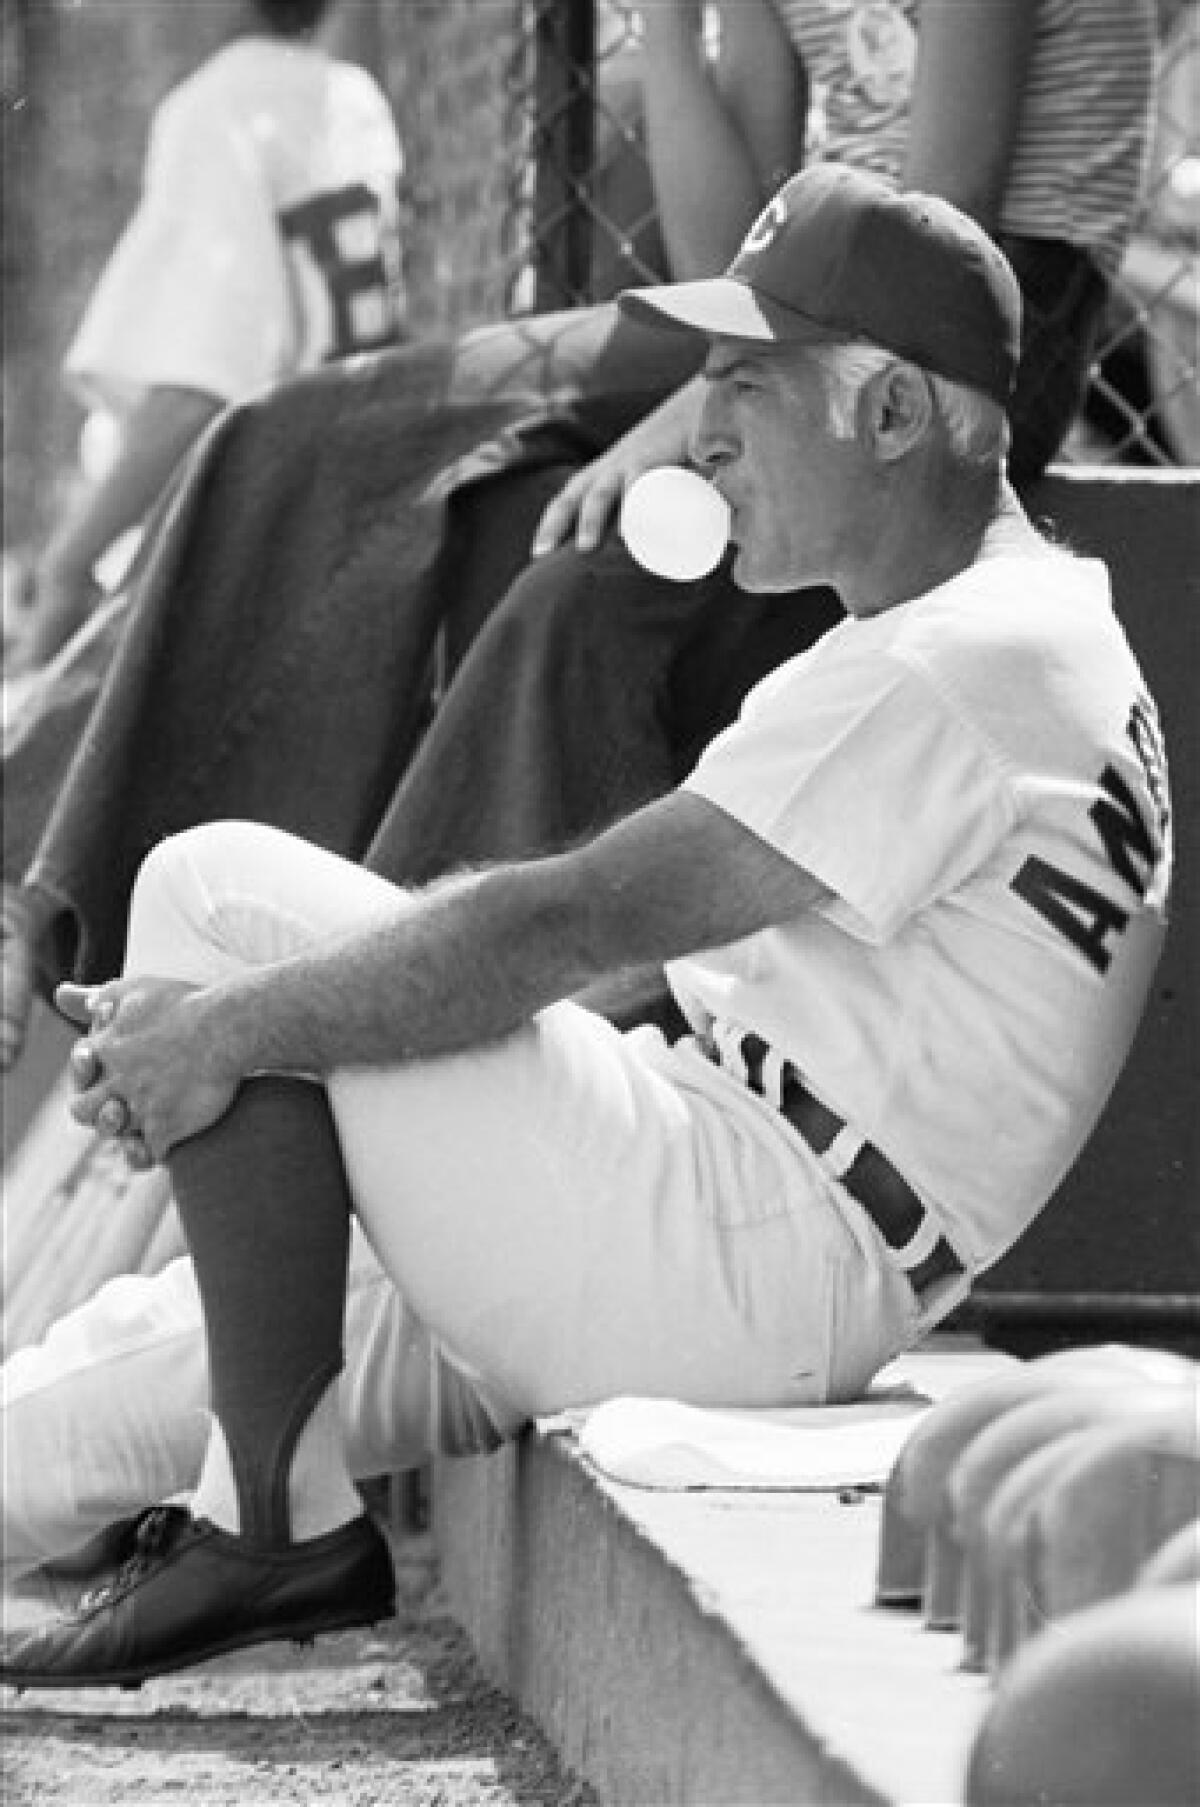 Remembering Sparky Anderson: Manager of the Big Red Machine